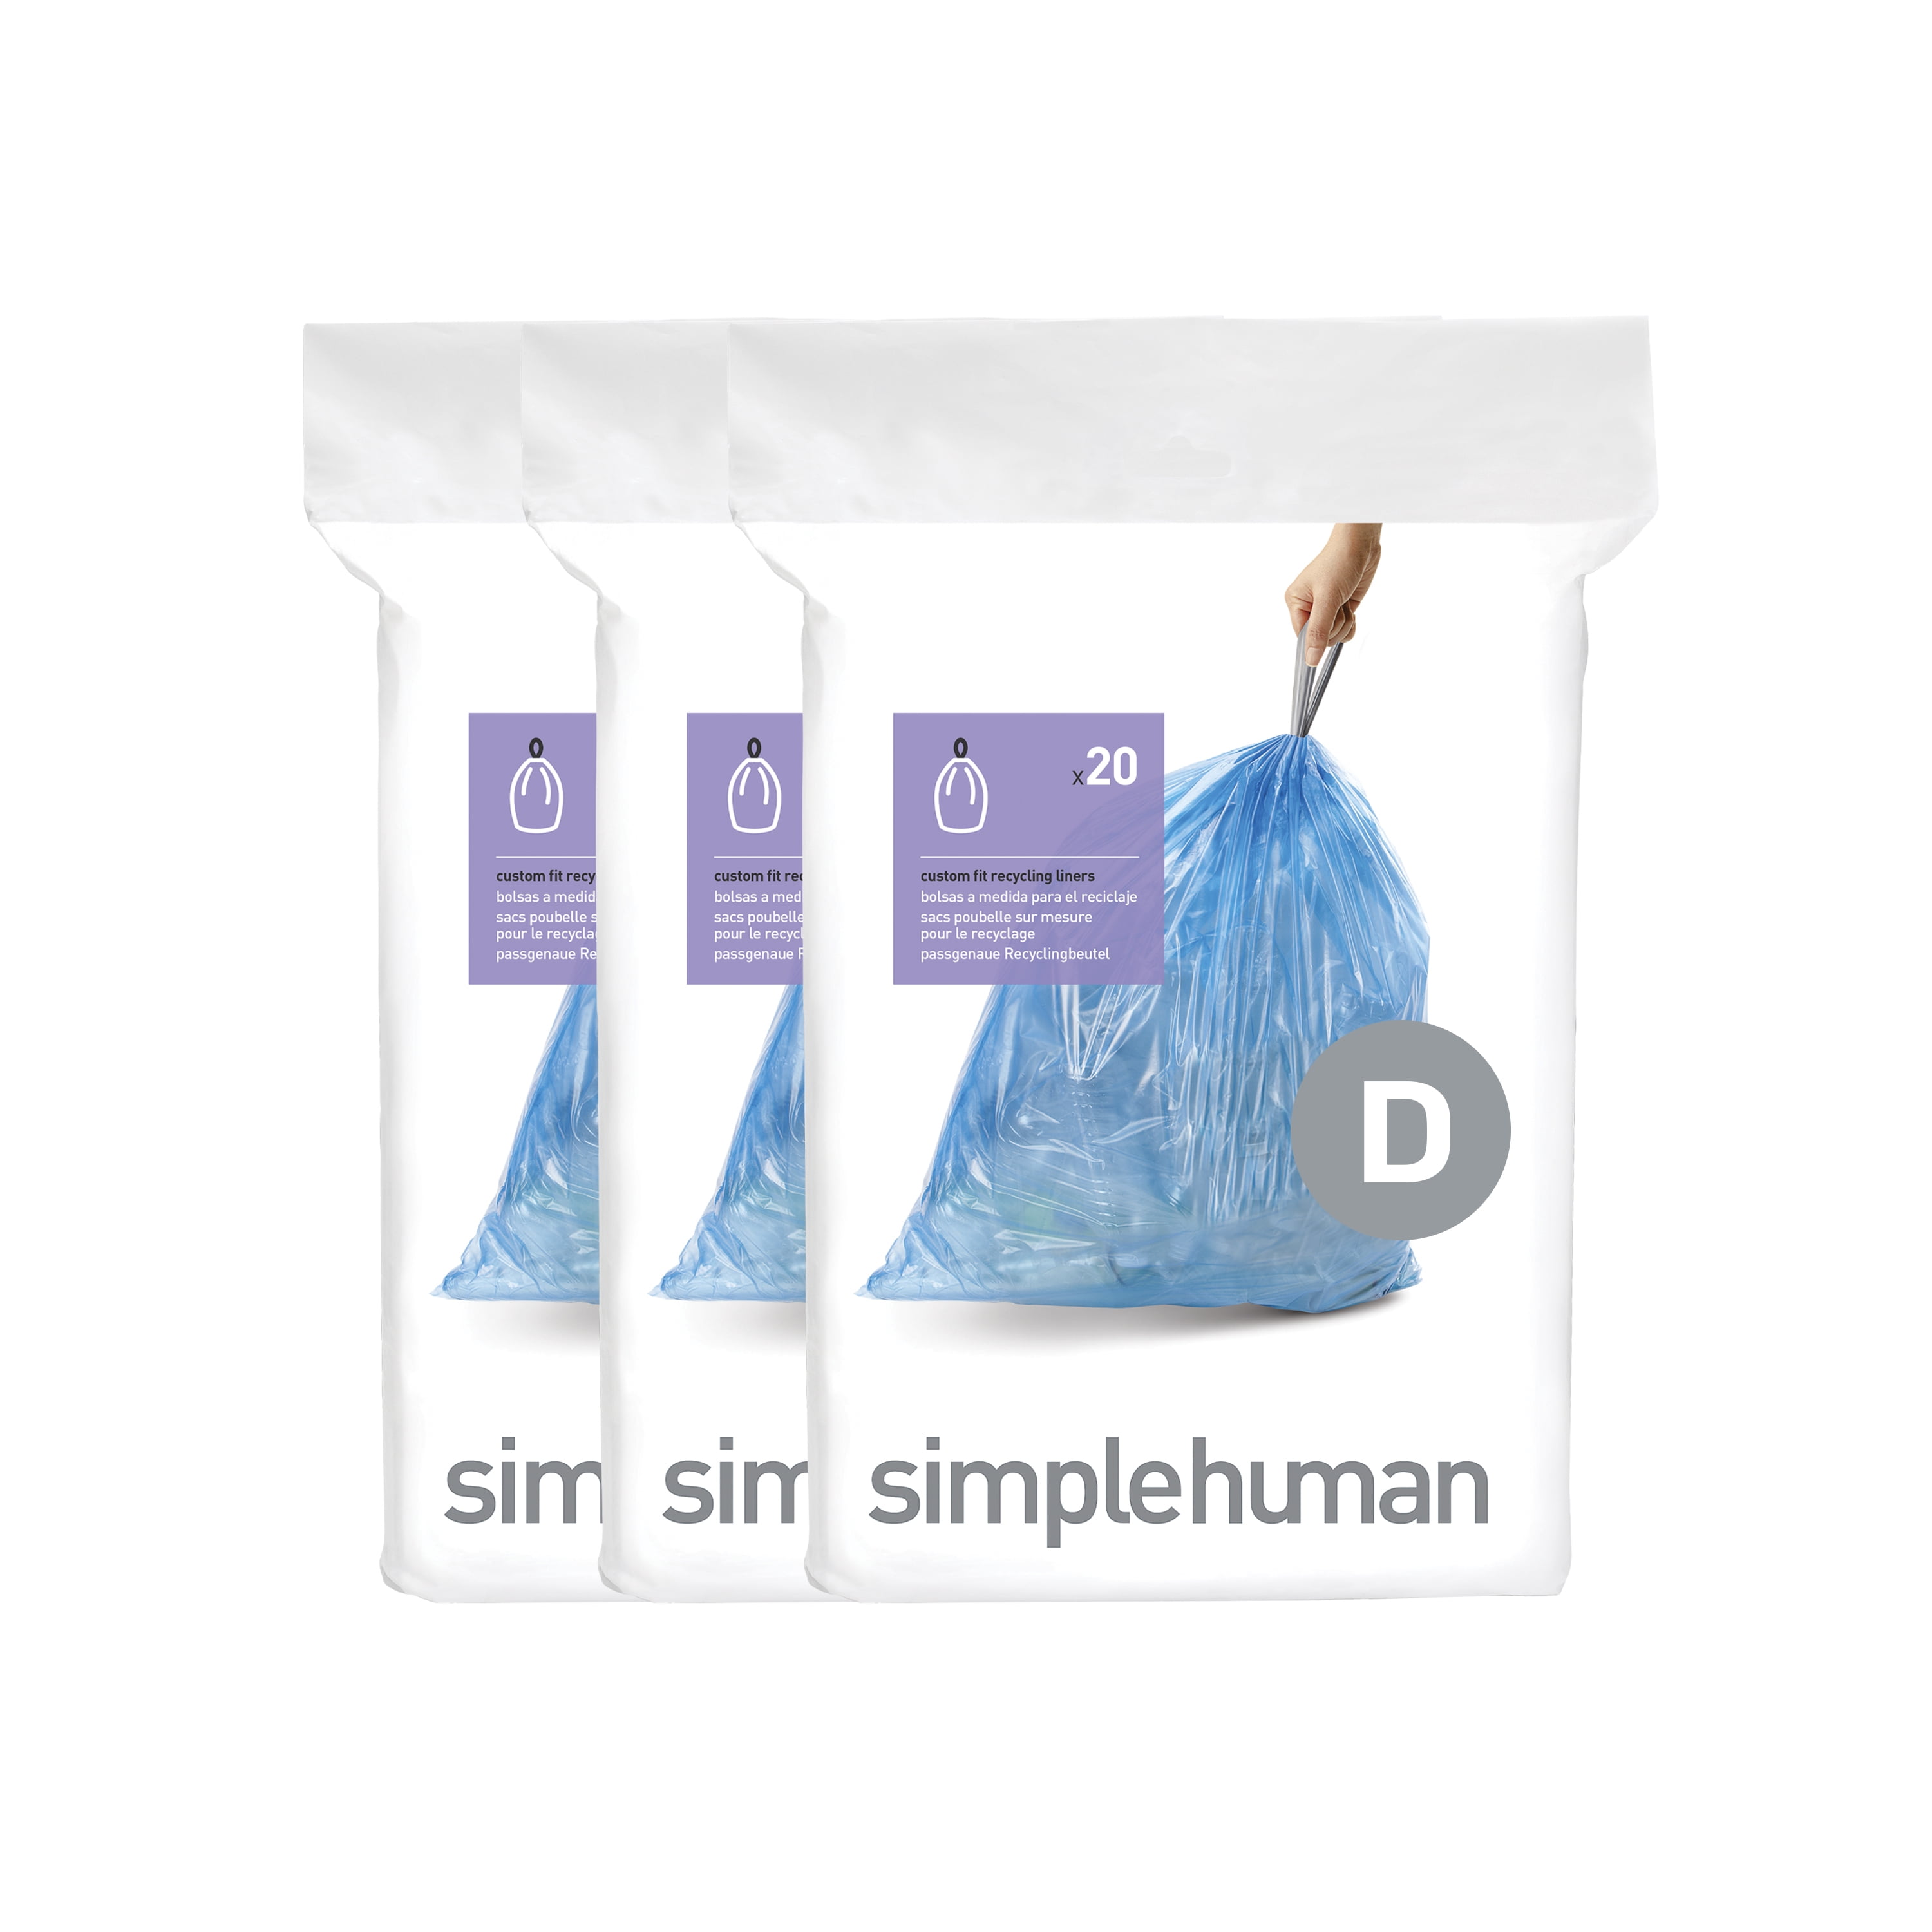 Simplehuman Code M Custom Fit Can Liners, 12 Gallon - 3 pack, 20 count each